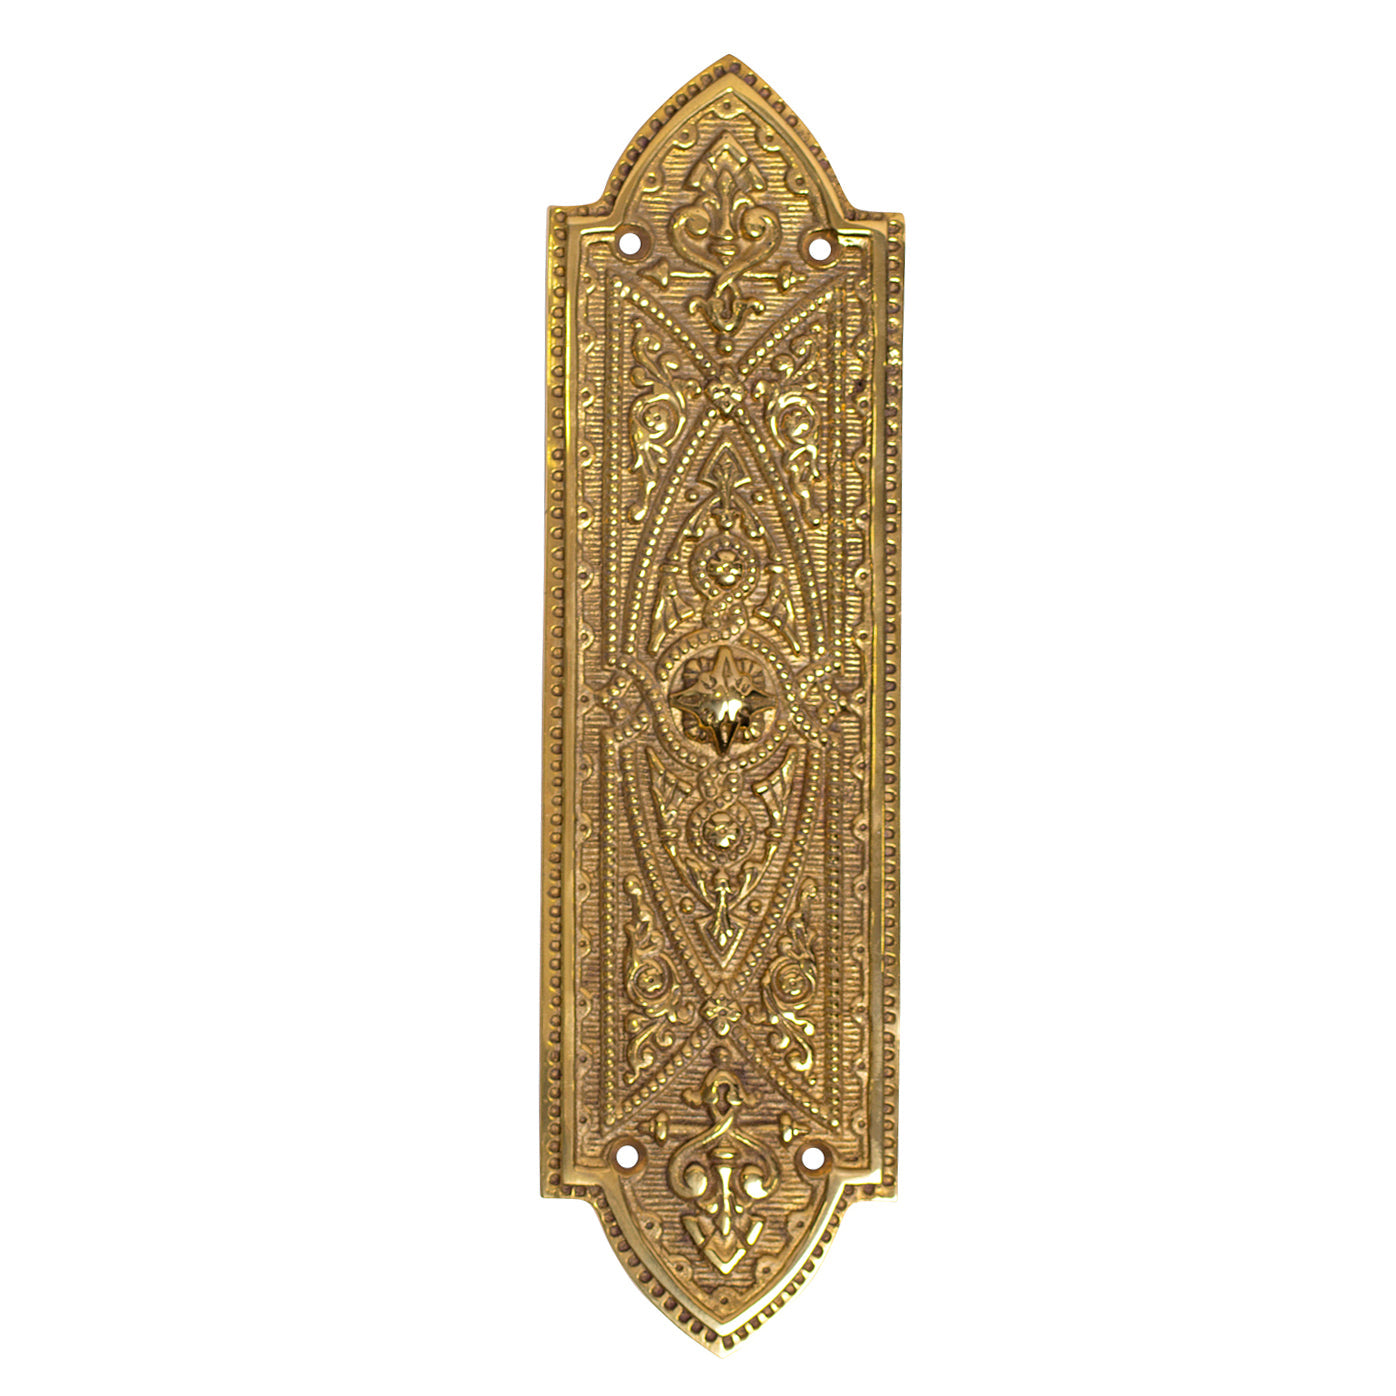 10 Inch Solid Brass Ornate Victorian Style Push Plate